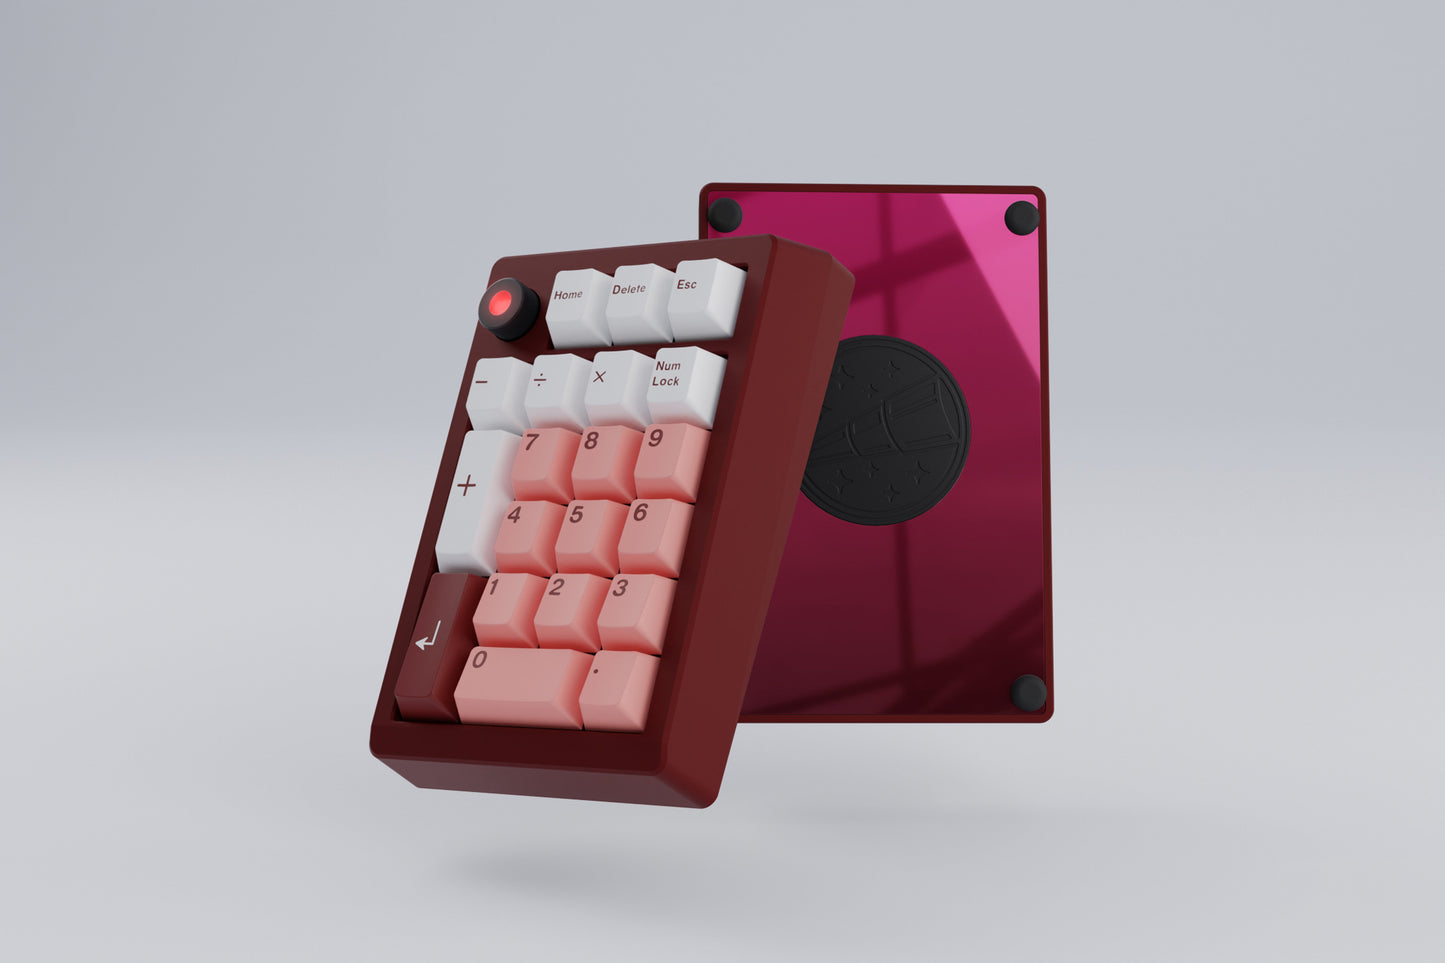 [Group-Buy] Meletrix ZoomPad Essential Edition (EE) Southpaw - Barebones Numpad Kit - Scarlet Red [Sea Shipping]